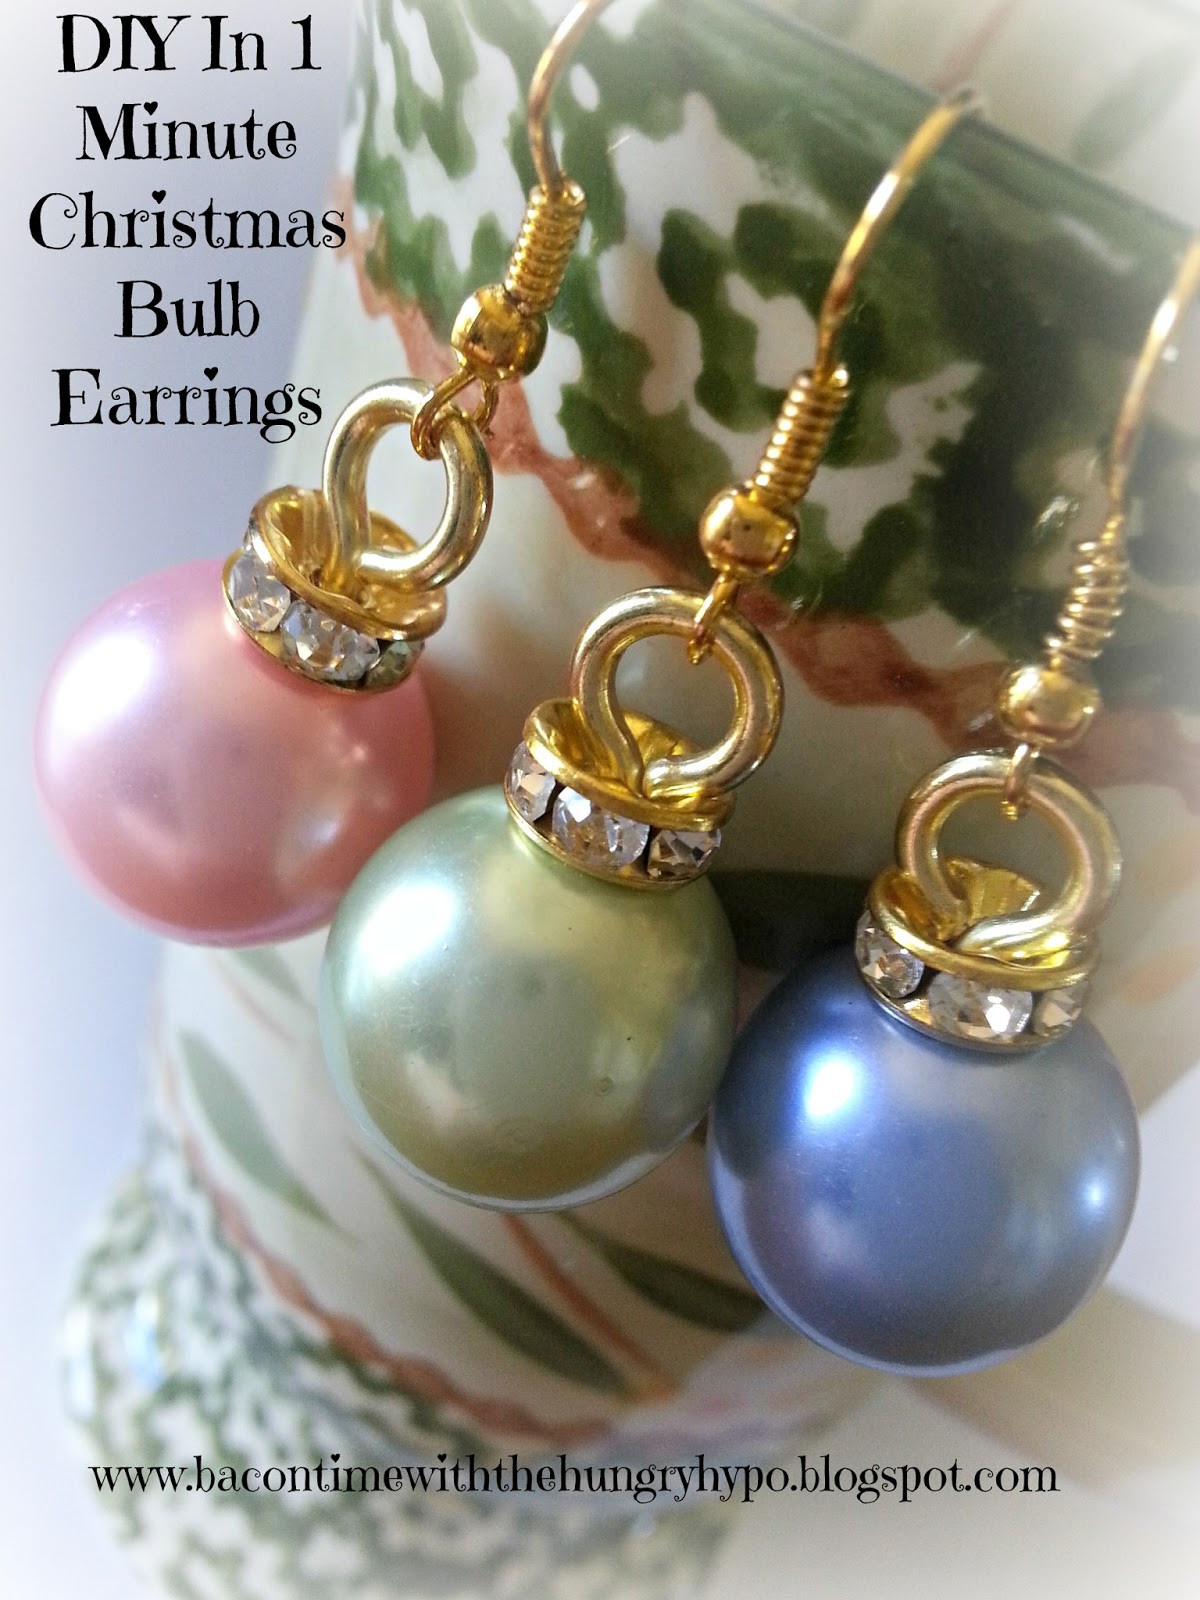 DIY Christmas Jewelry
 Bacon Time With The Hungry Hypo DIY In 1 Minute Christmas